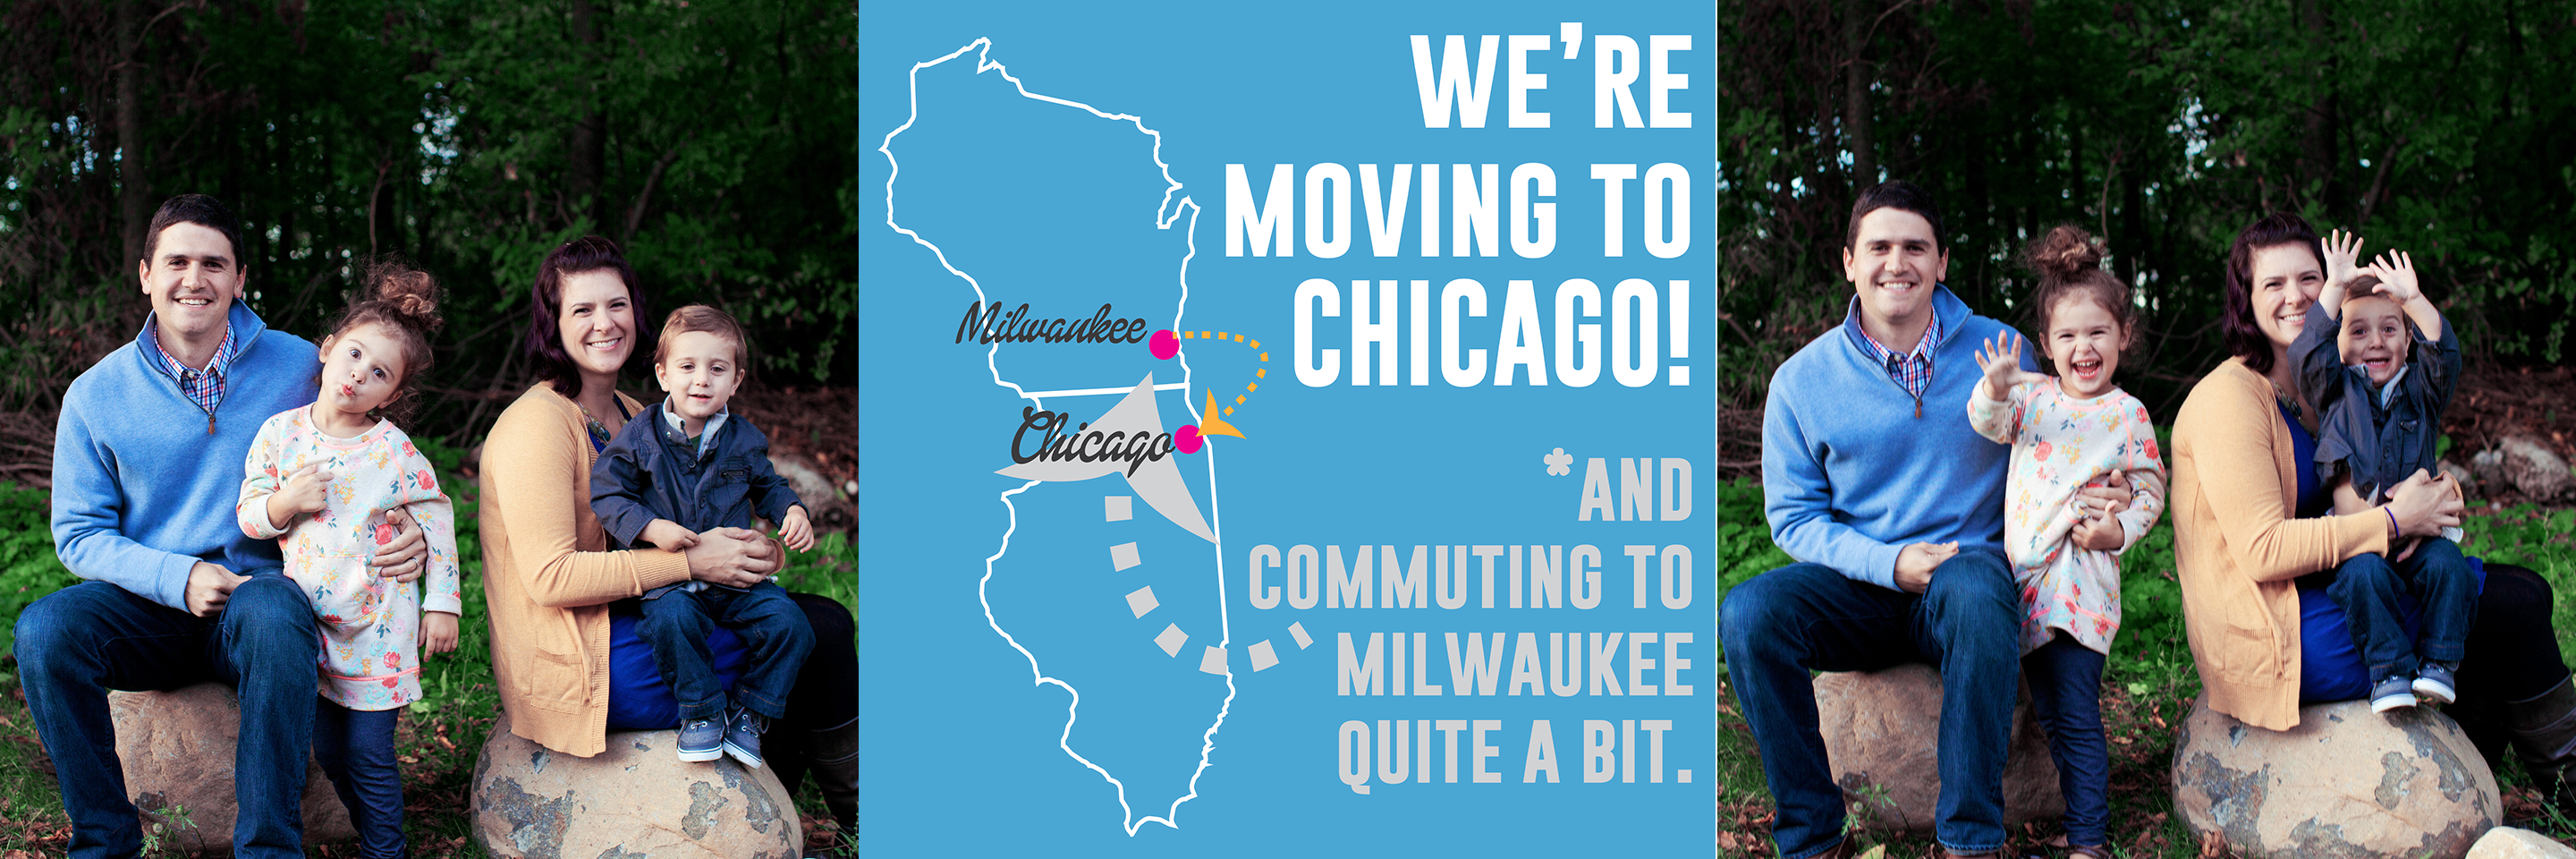 We’re moving to Chicago!